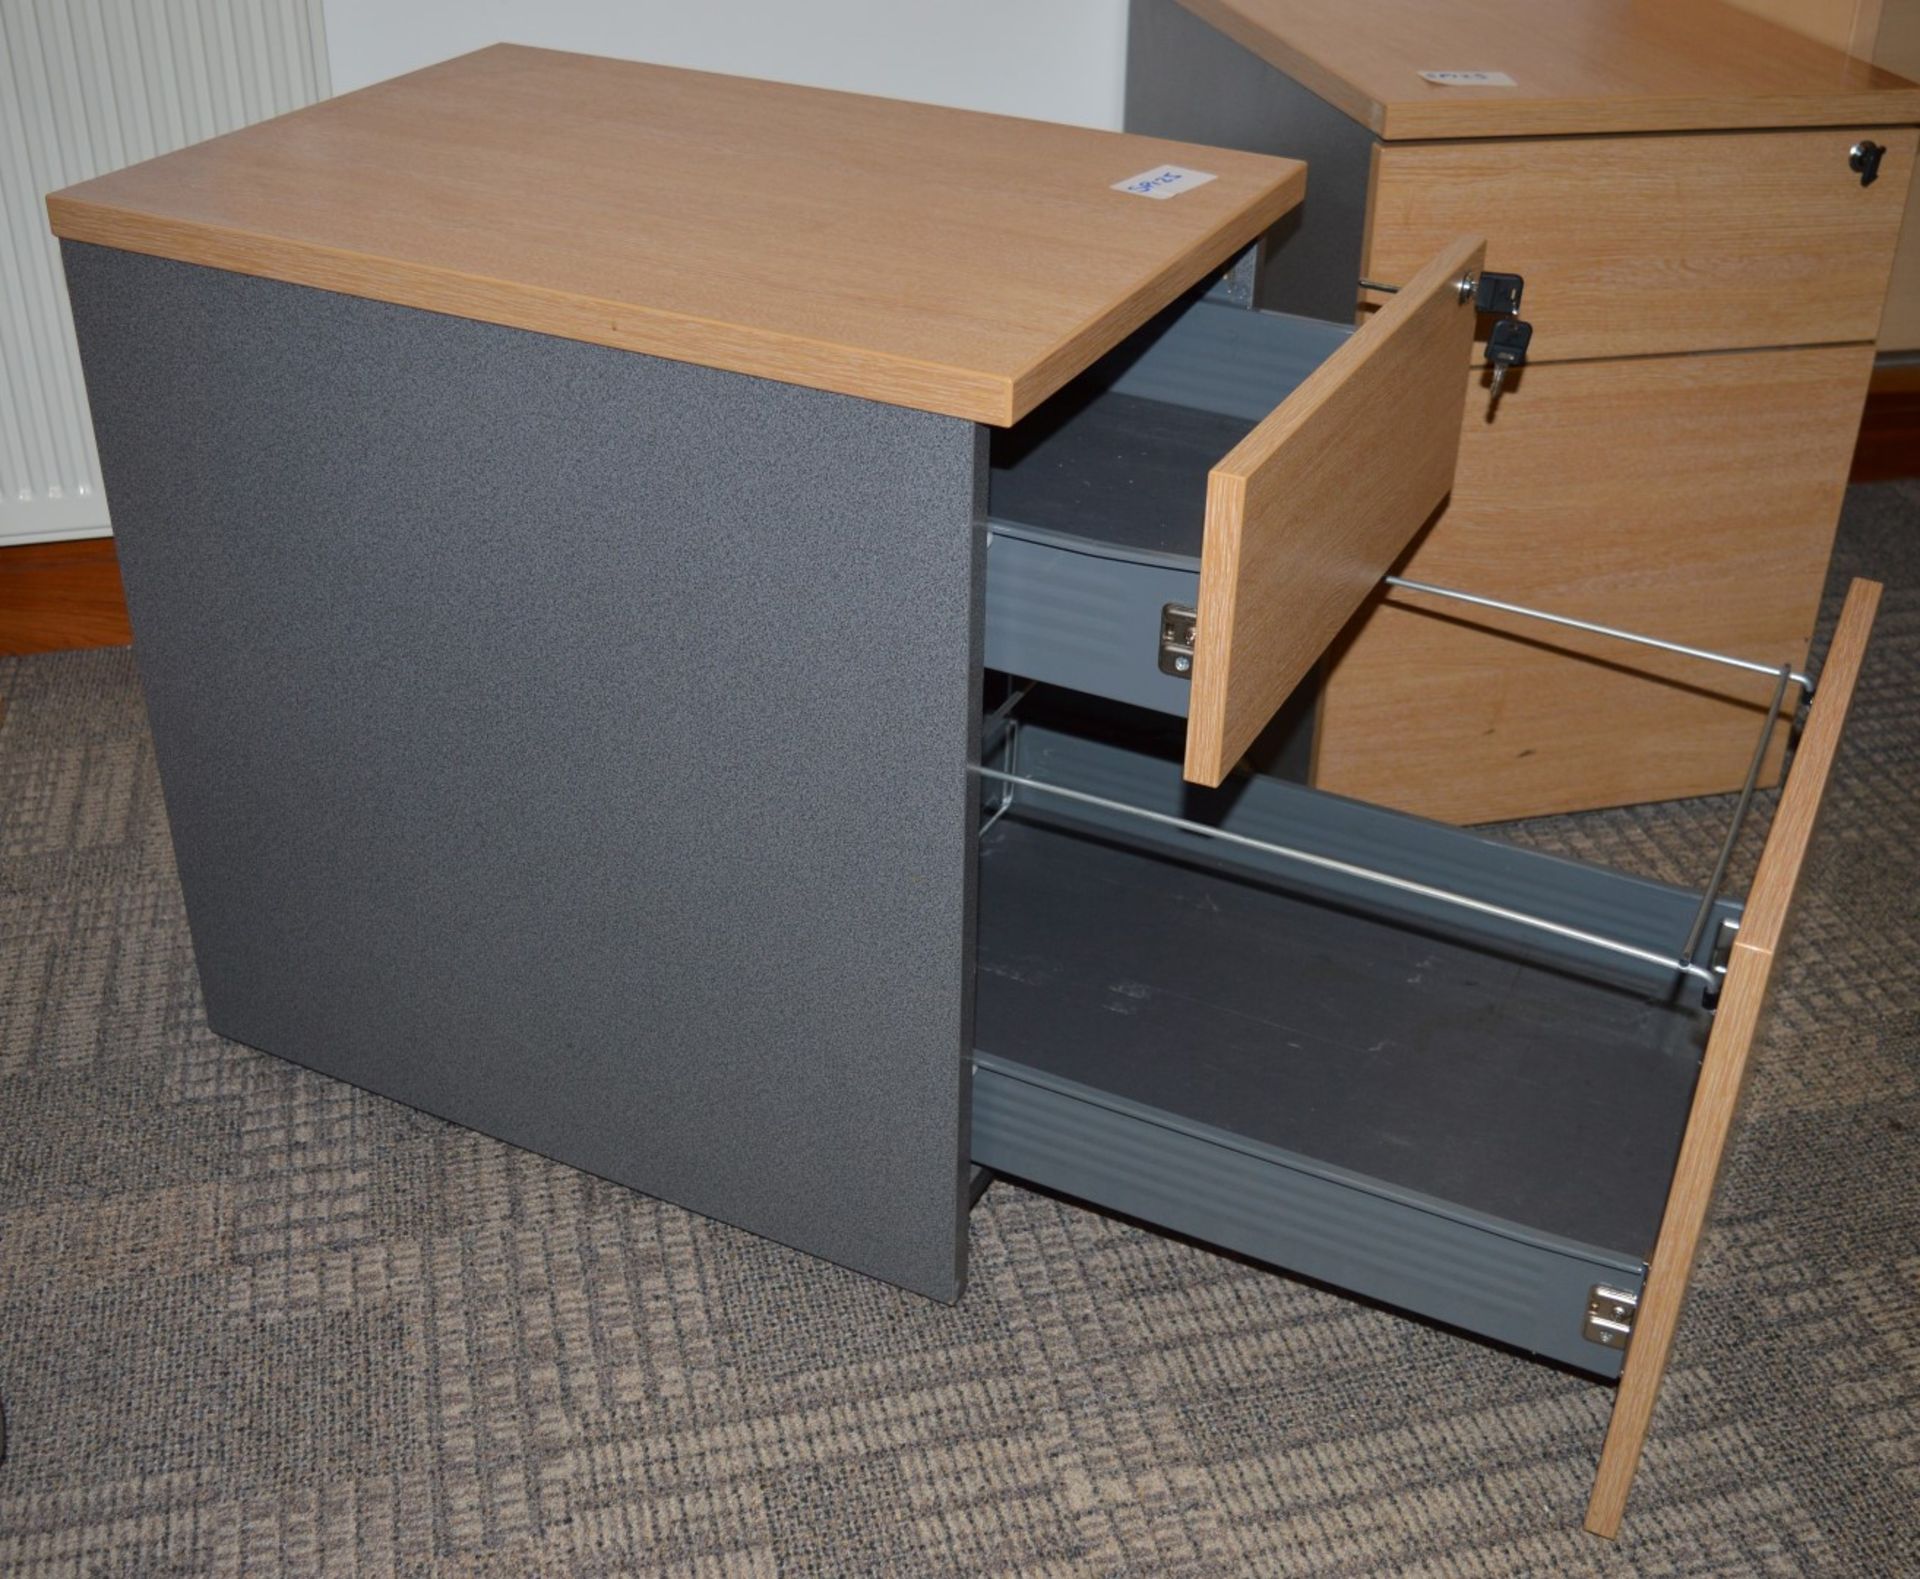 1 x Two Drawer Mobile Pedestal Drawers - Includes Key - Modern Beech / Grey Finish - Storage - Image 3 of 3